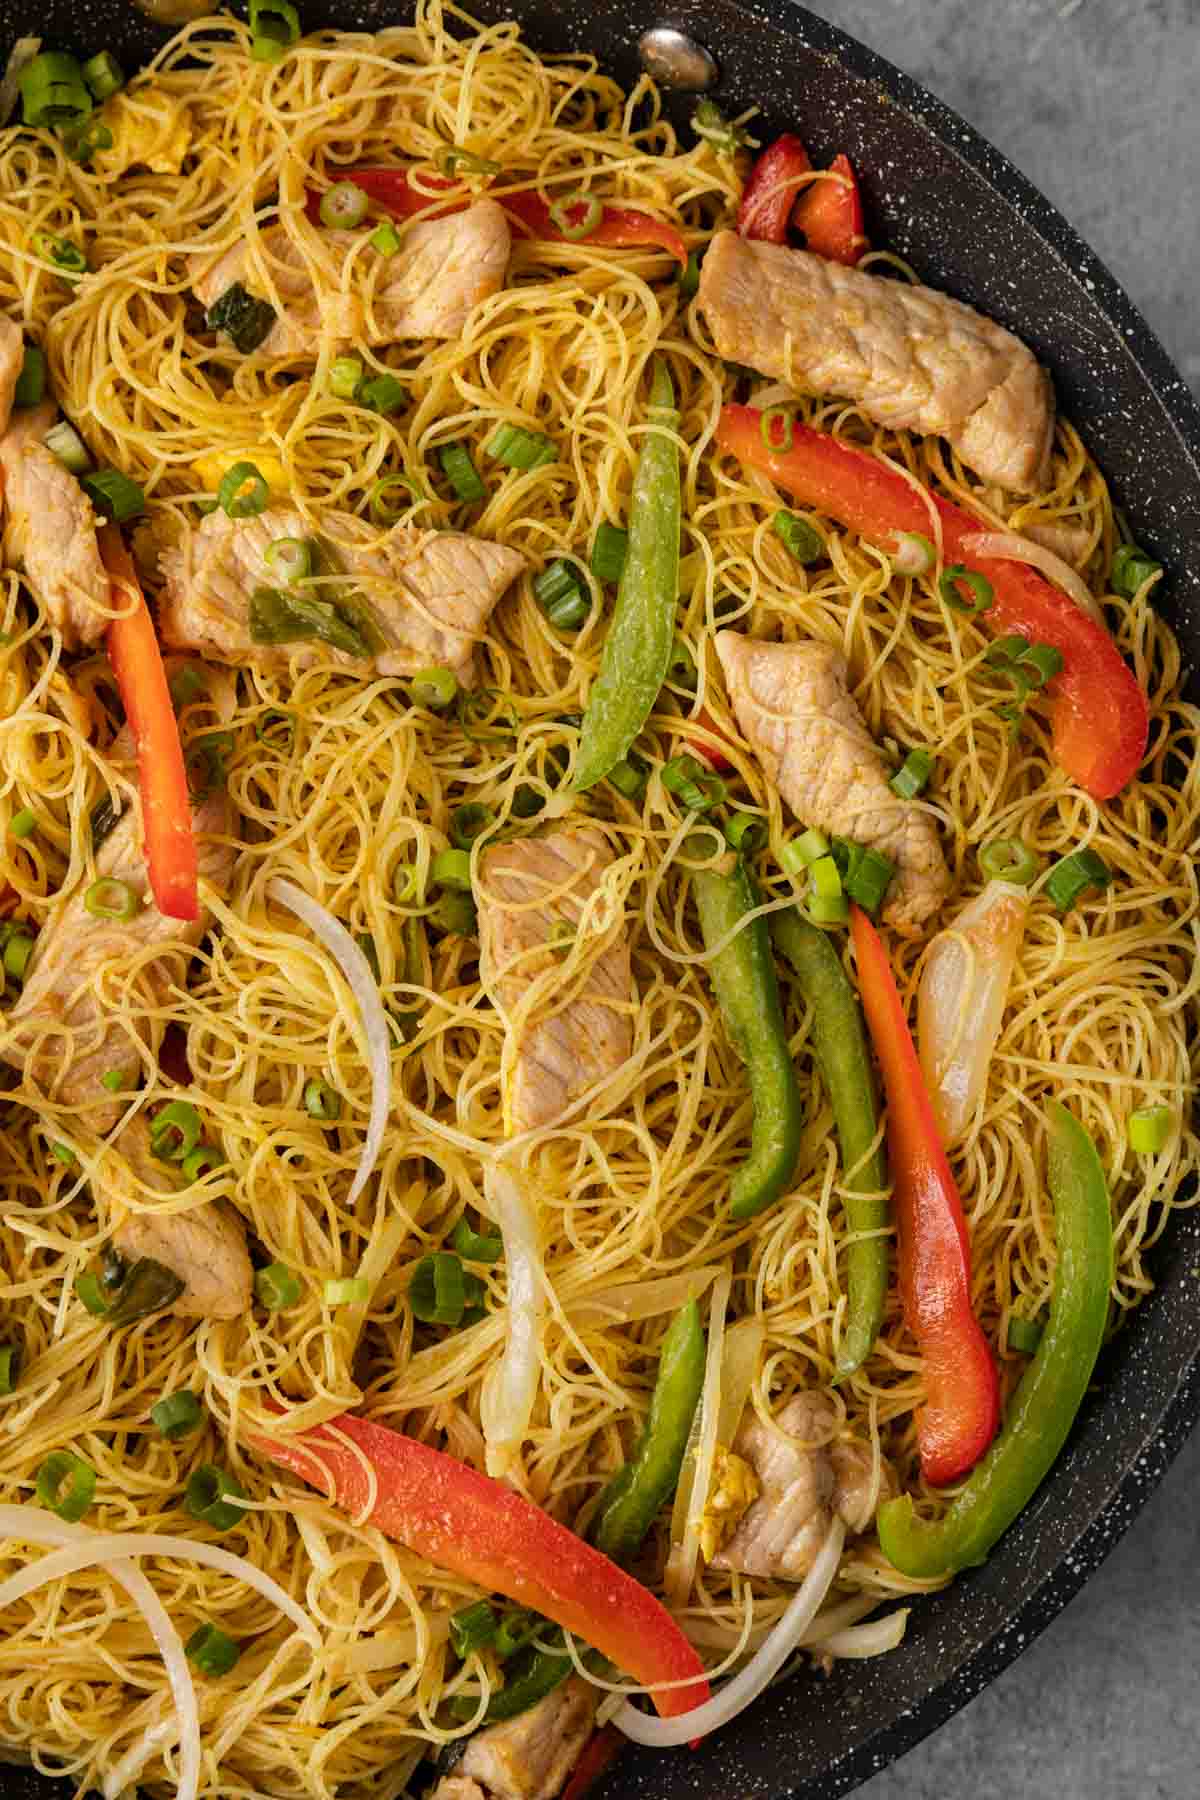 Singapore Noodles finished in wok